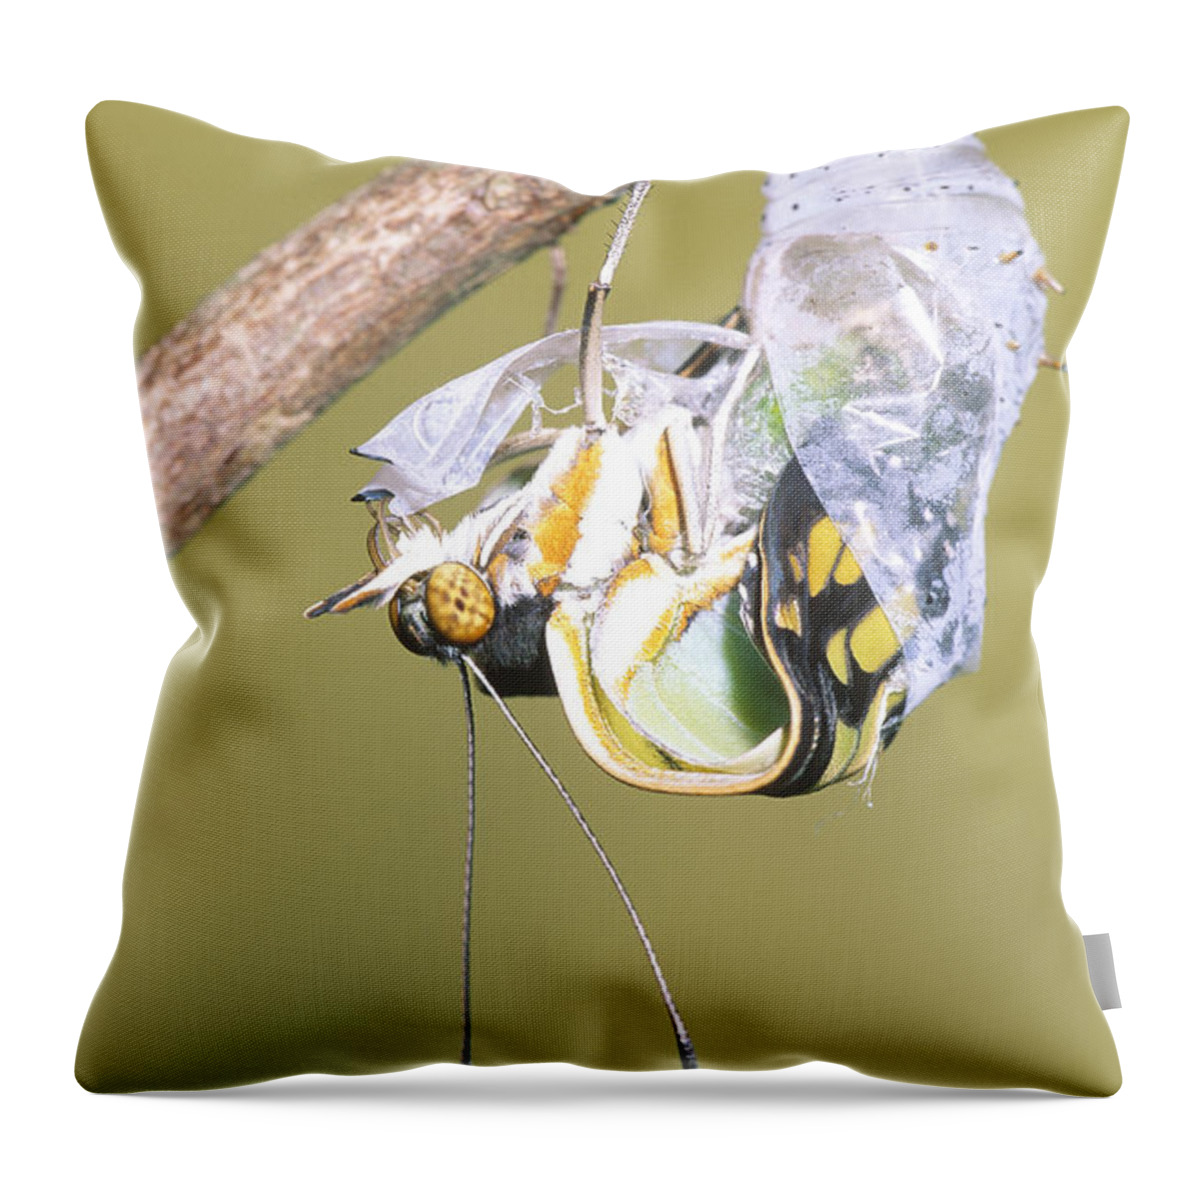 Animal Throw Pillow featuring the photograph Malachite Butterfly Emerging 4 Of 6 by Millard H. Sharp